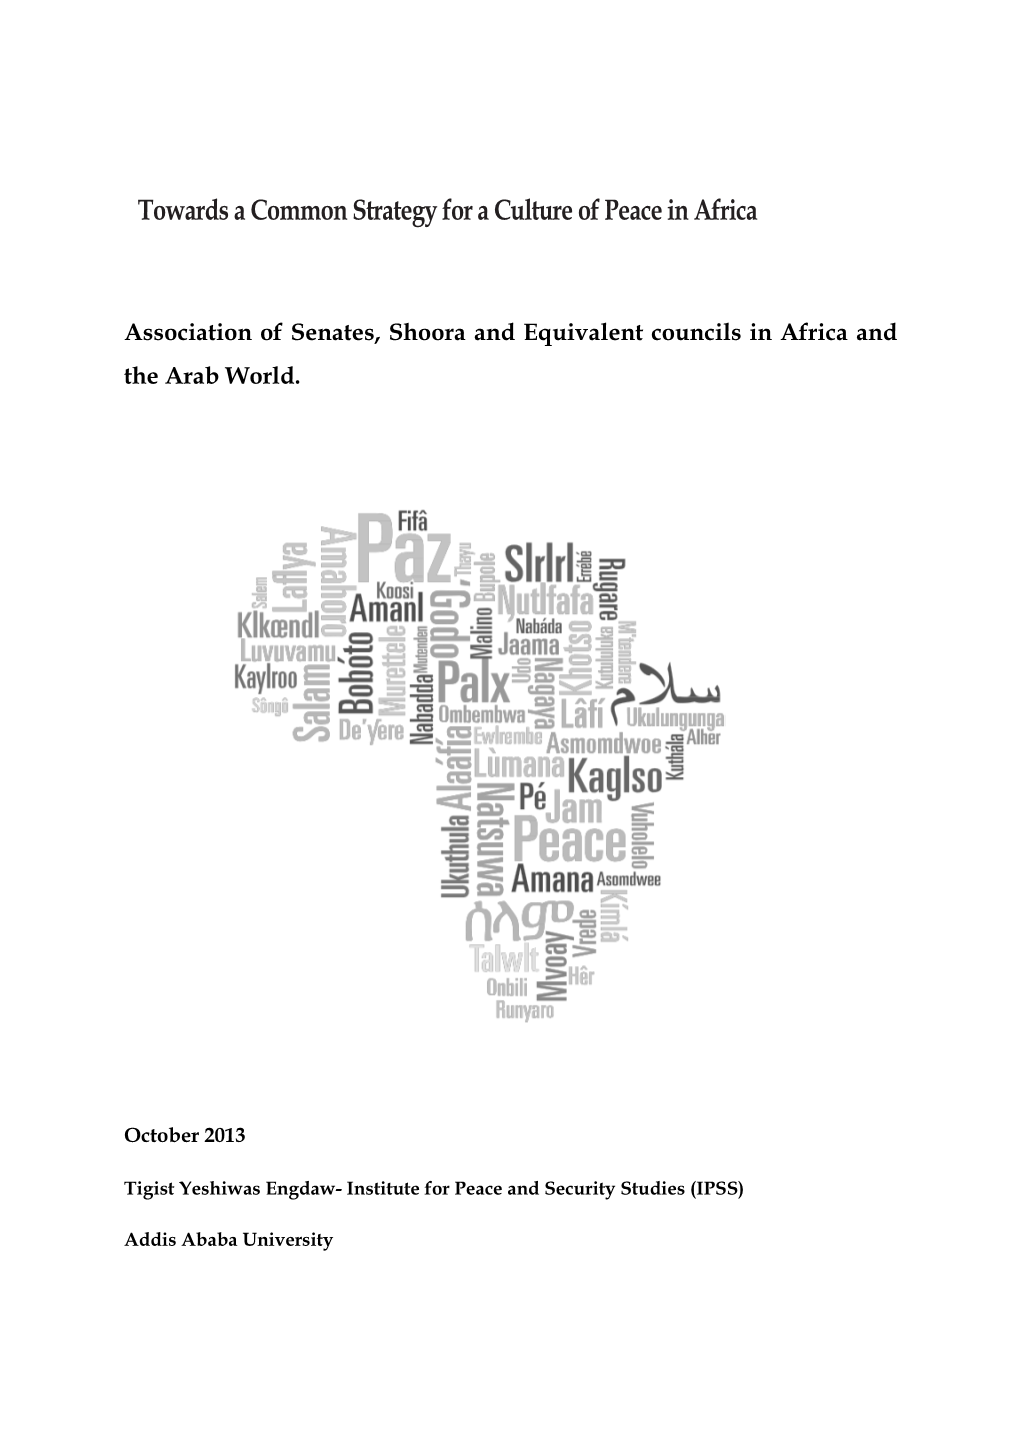 Towards a Common Strategy for a Culture of Peace in Africa